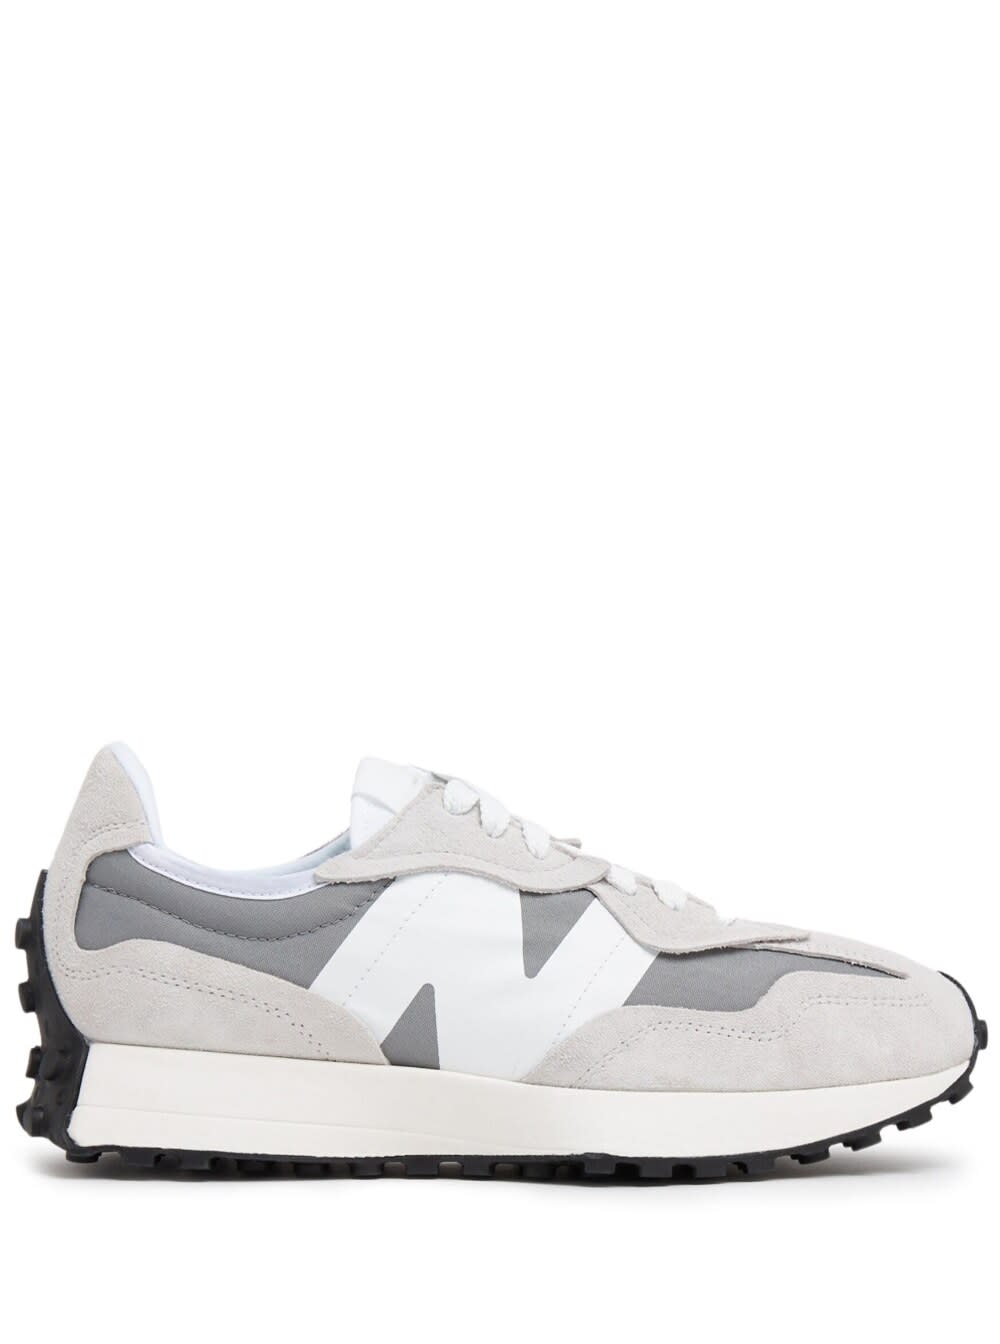 New Balance 327 Grey Low Top Sneakers With Suede Inserts And Logo In Leather Man